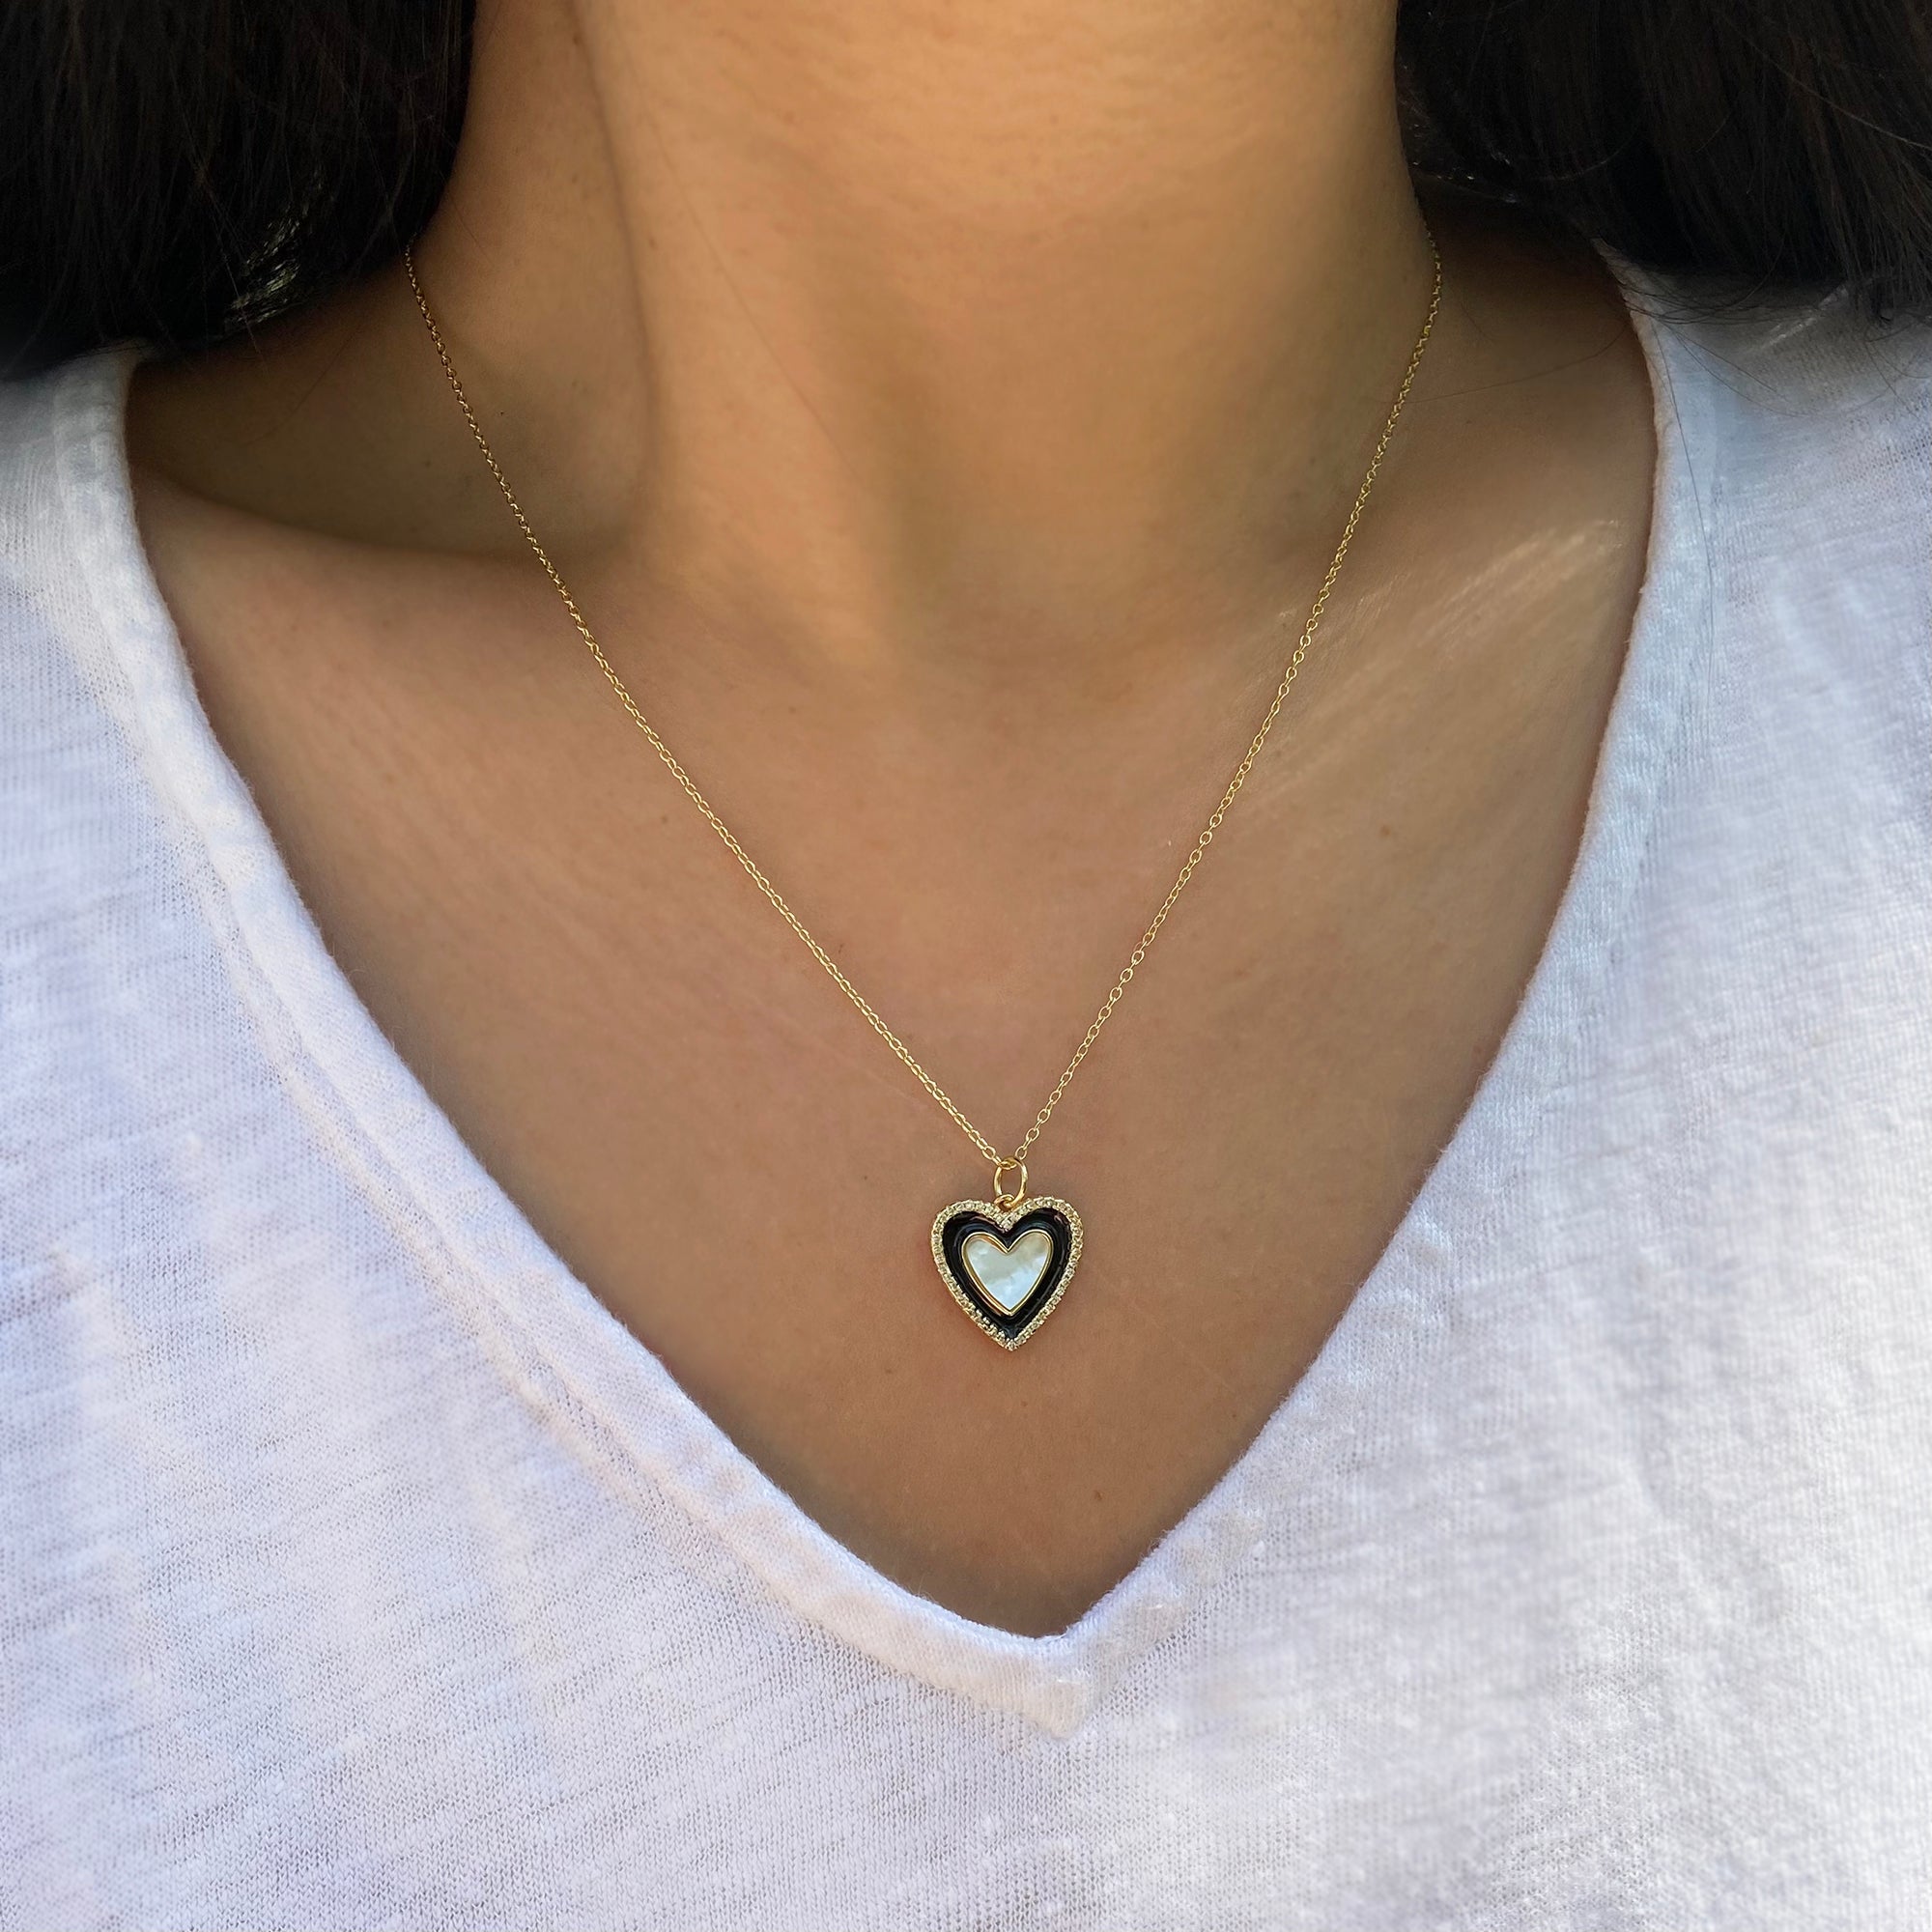 Two Tone Heart Necklace - Black Enamel and Pearl